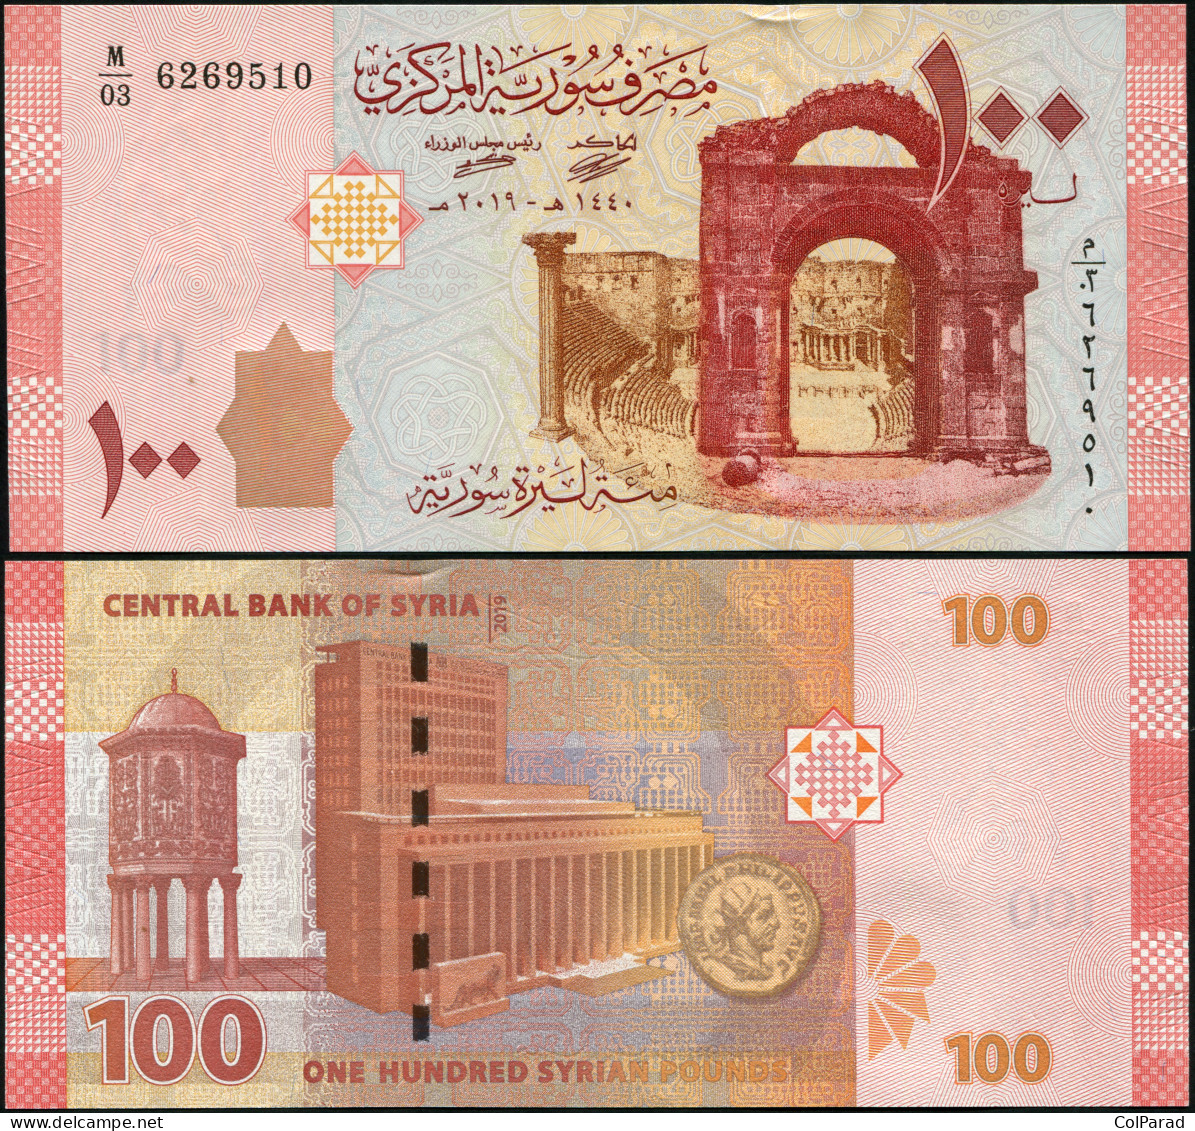 SYRIA 100 SYRIAN POUNDS - 2019 - Paper Unc - P.NL Banknote - Siria